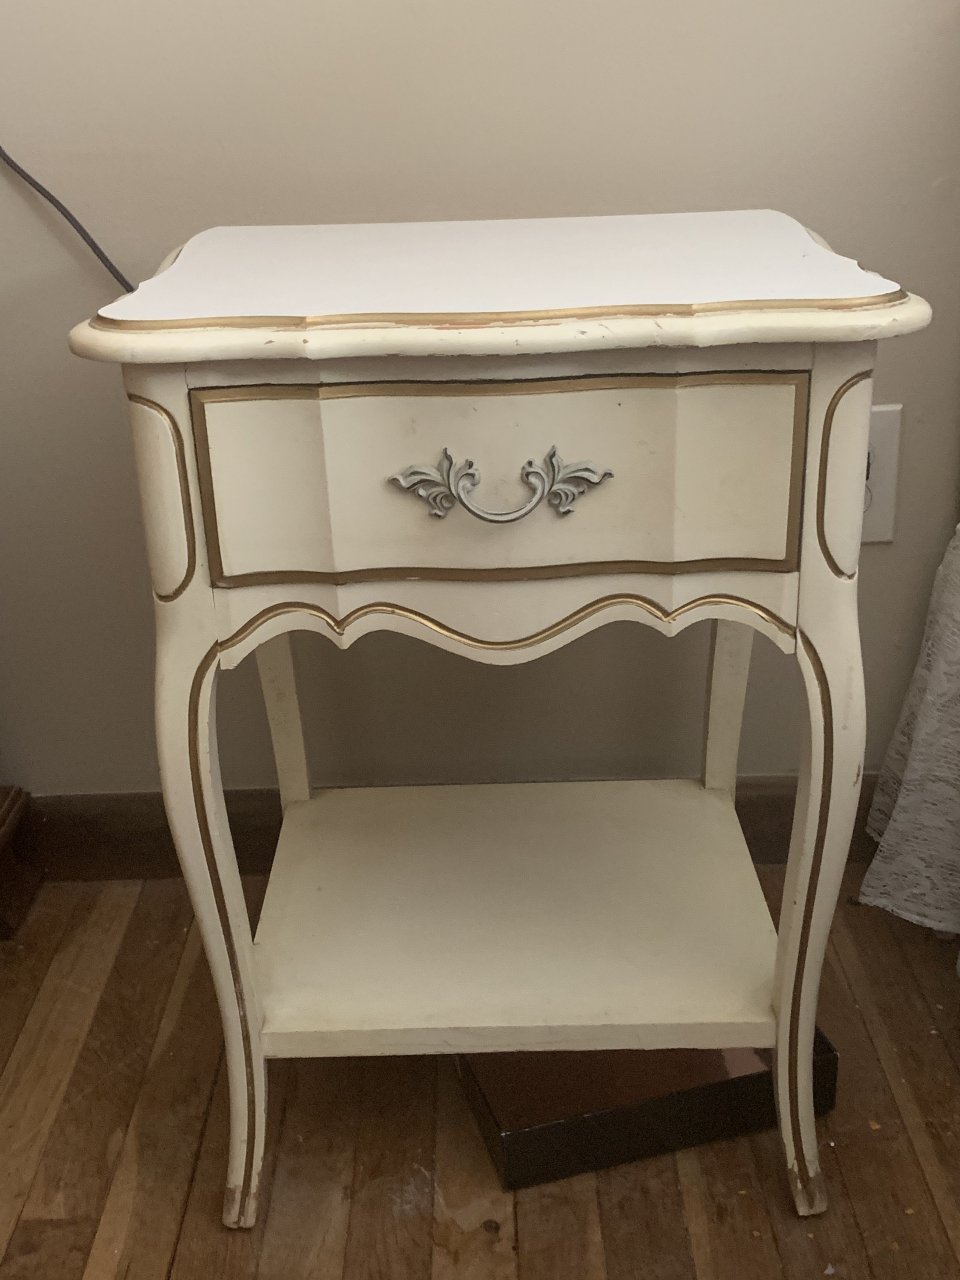 French Provincial Bedroom Set And More! | My Antique Furniture Collection